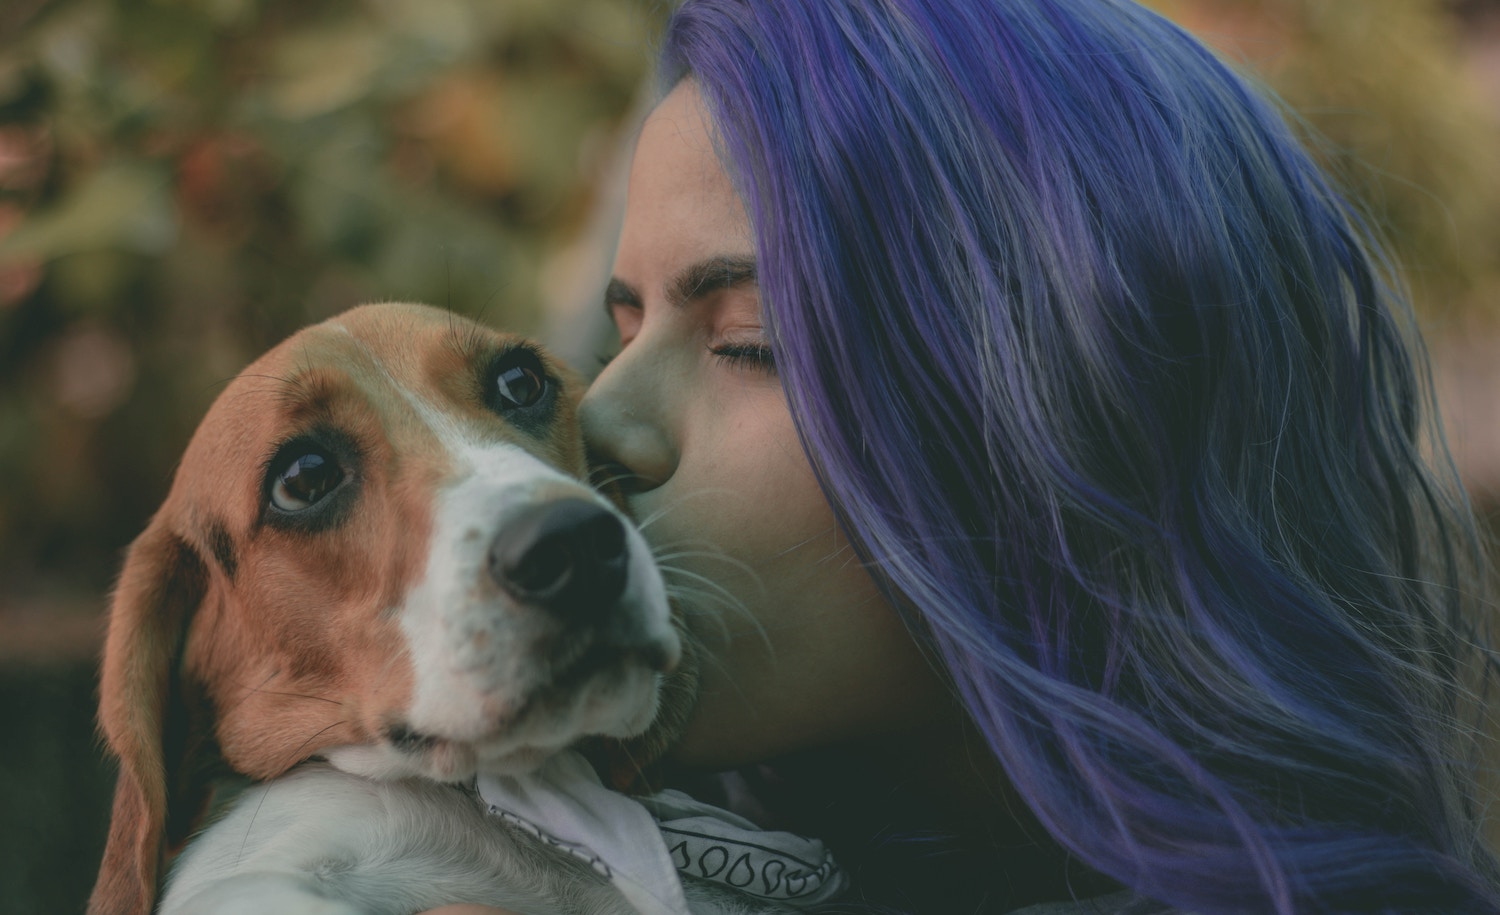 a highly sensitive person kisses her dog